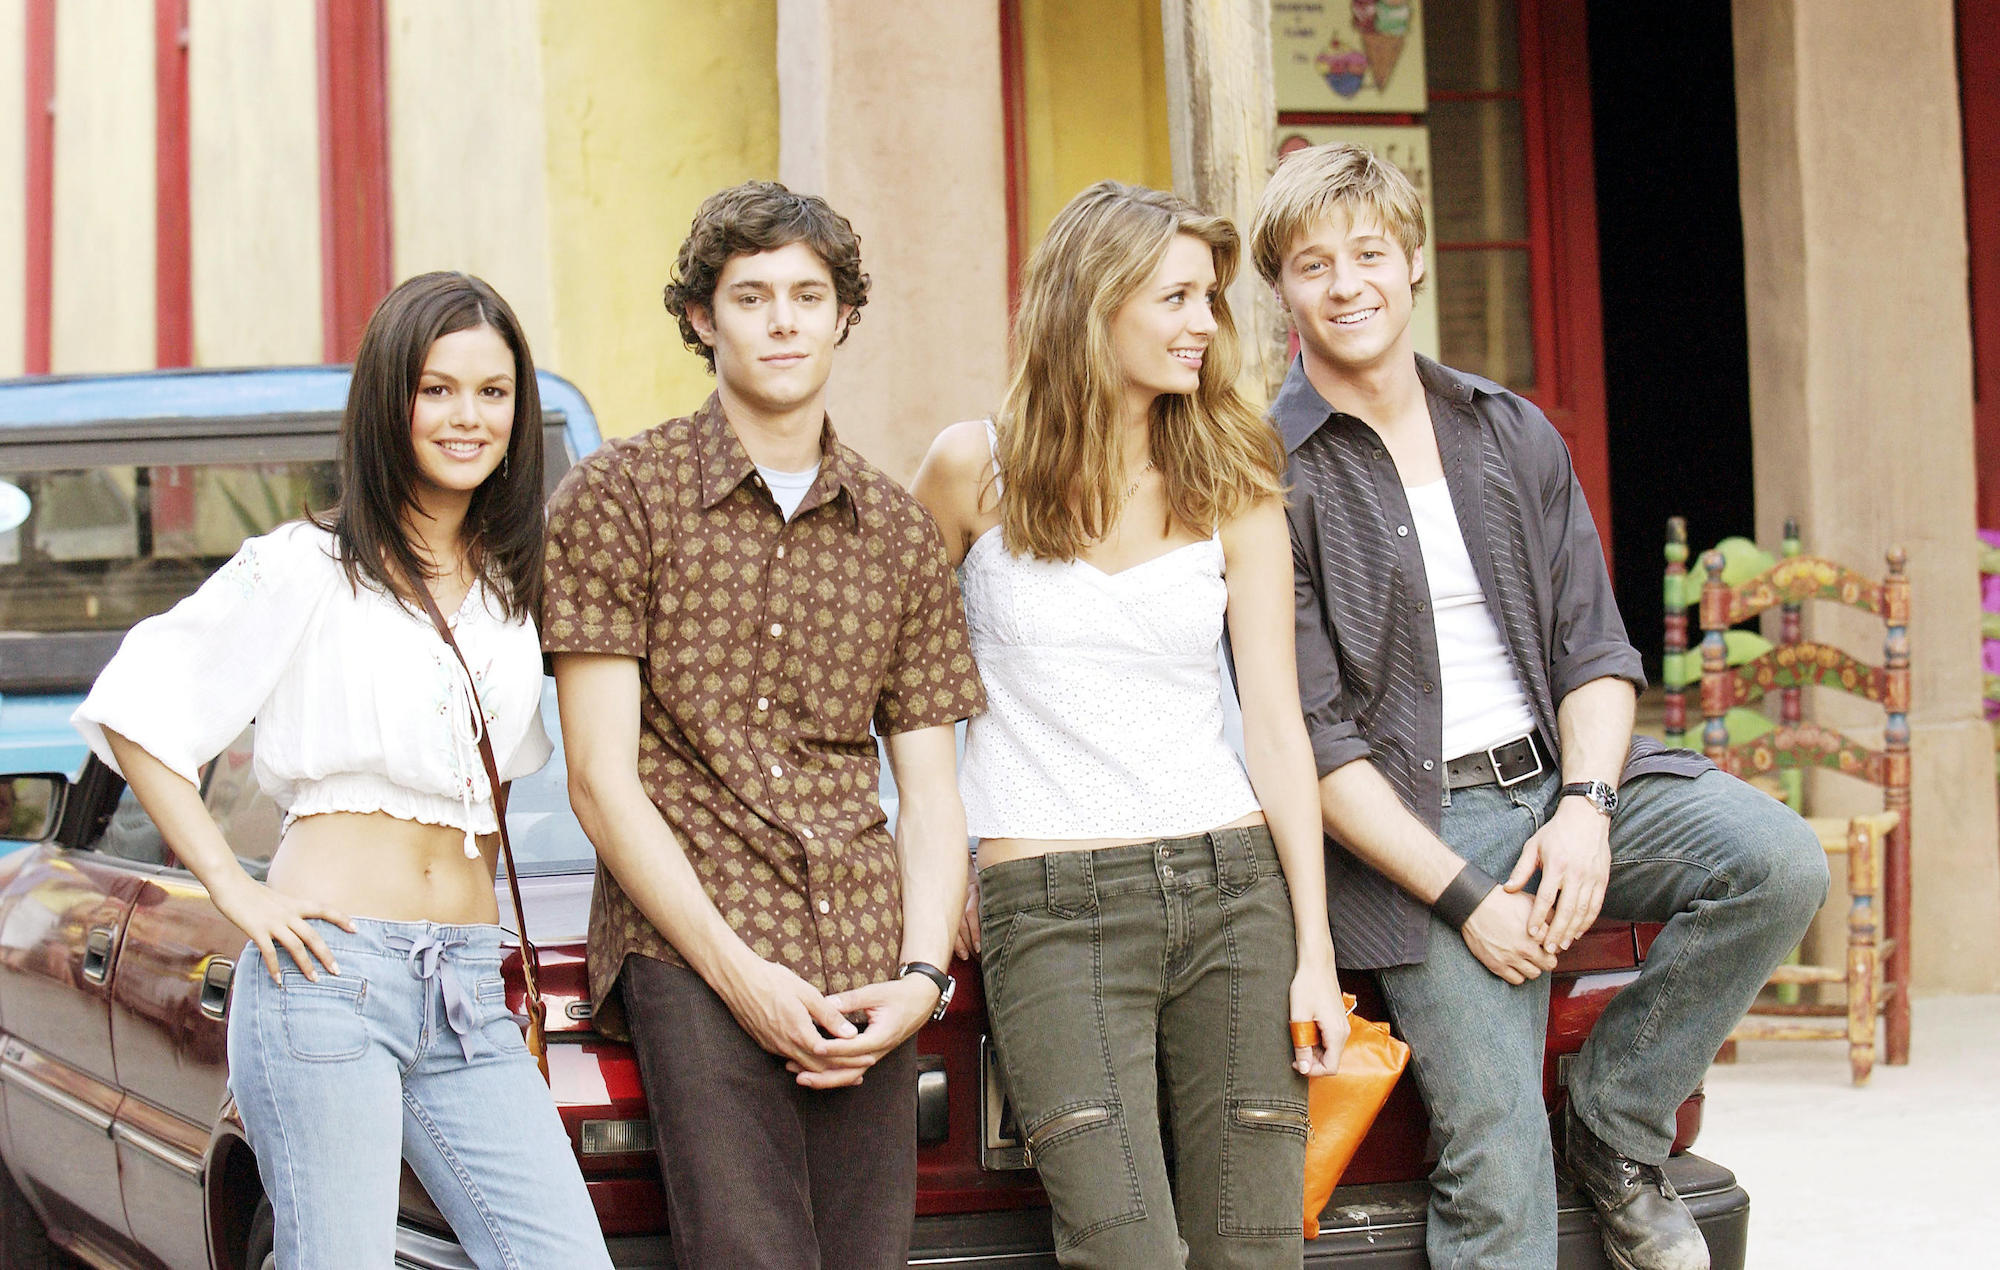 The O. C., Streaming options, Online discounts, Entertainment shopping, 2000x1270 HD Desktop